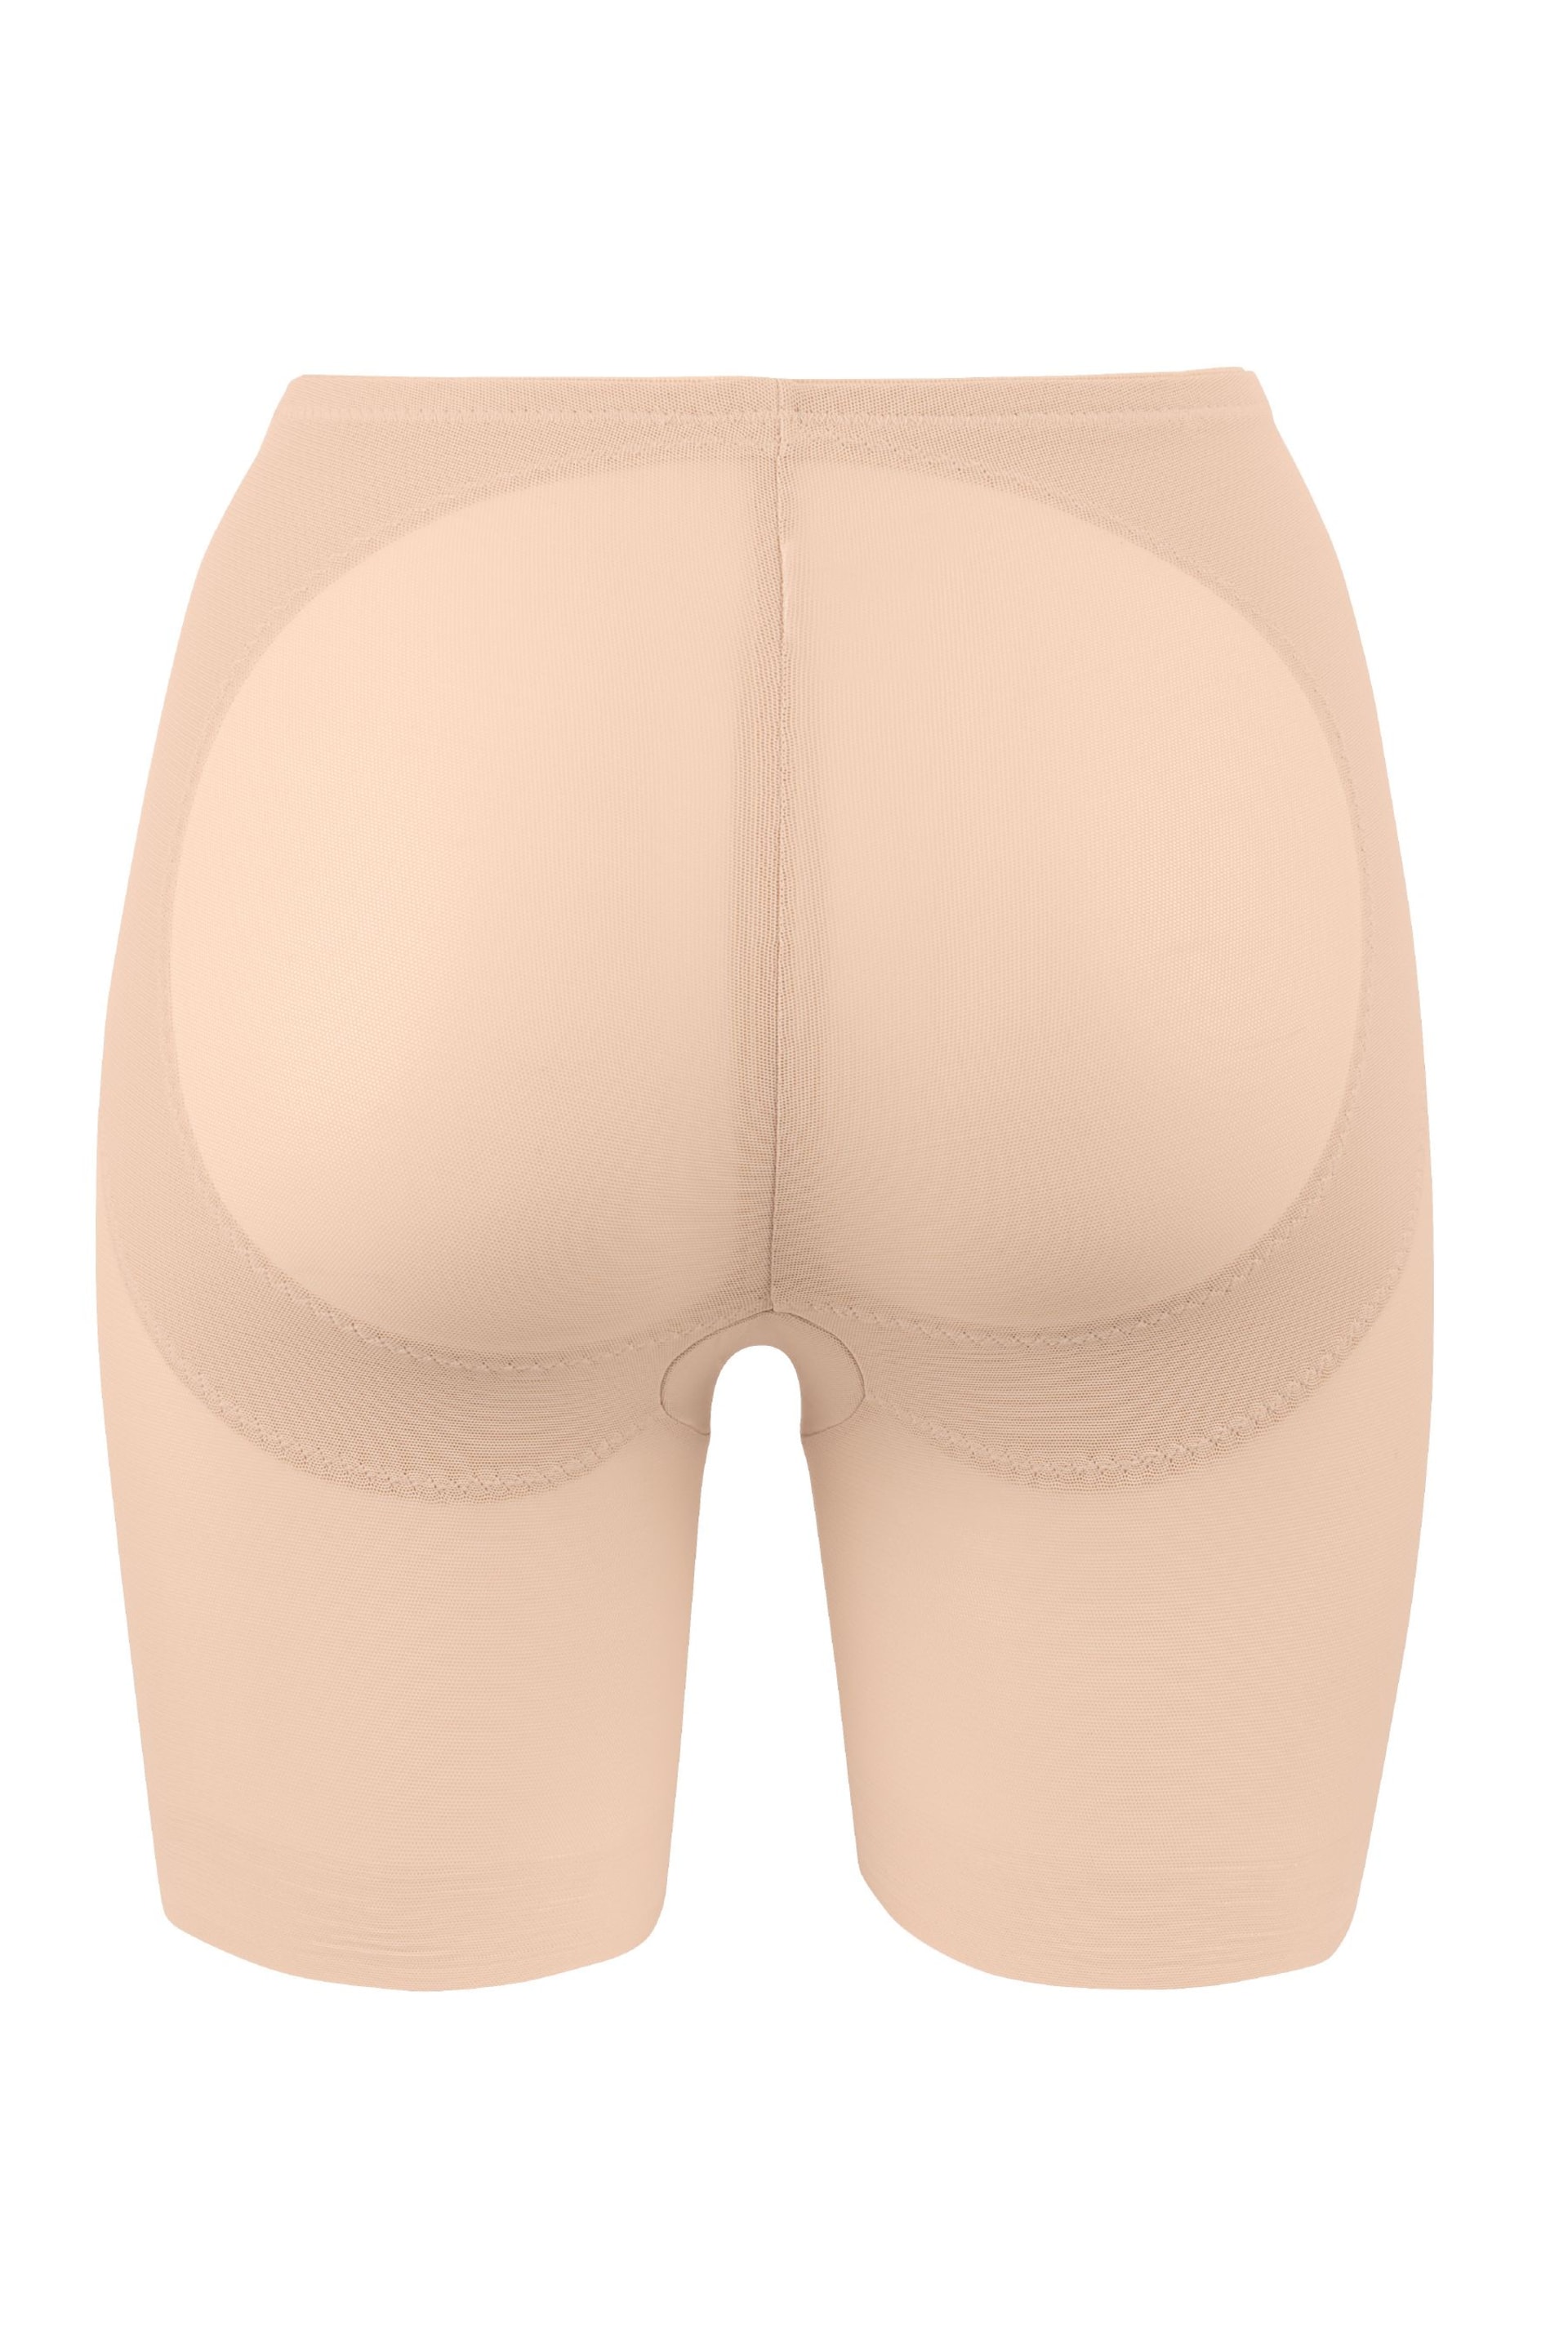 Miraclesuit High Waisted Sheer Tummy Control Rear Lift Shapewear - Image 5 of 6